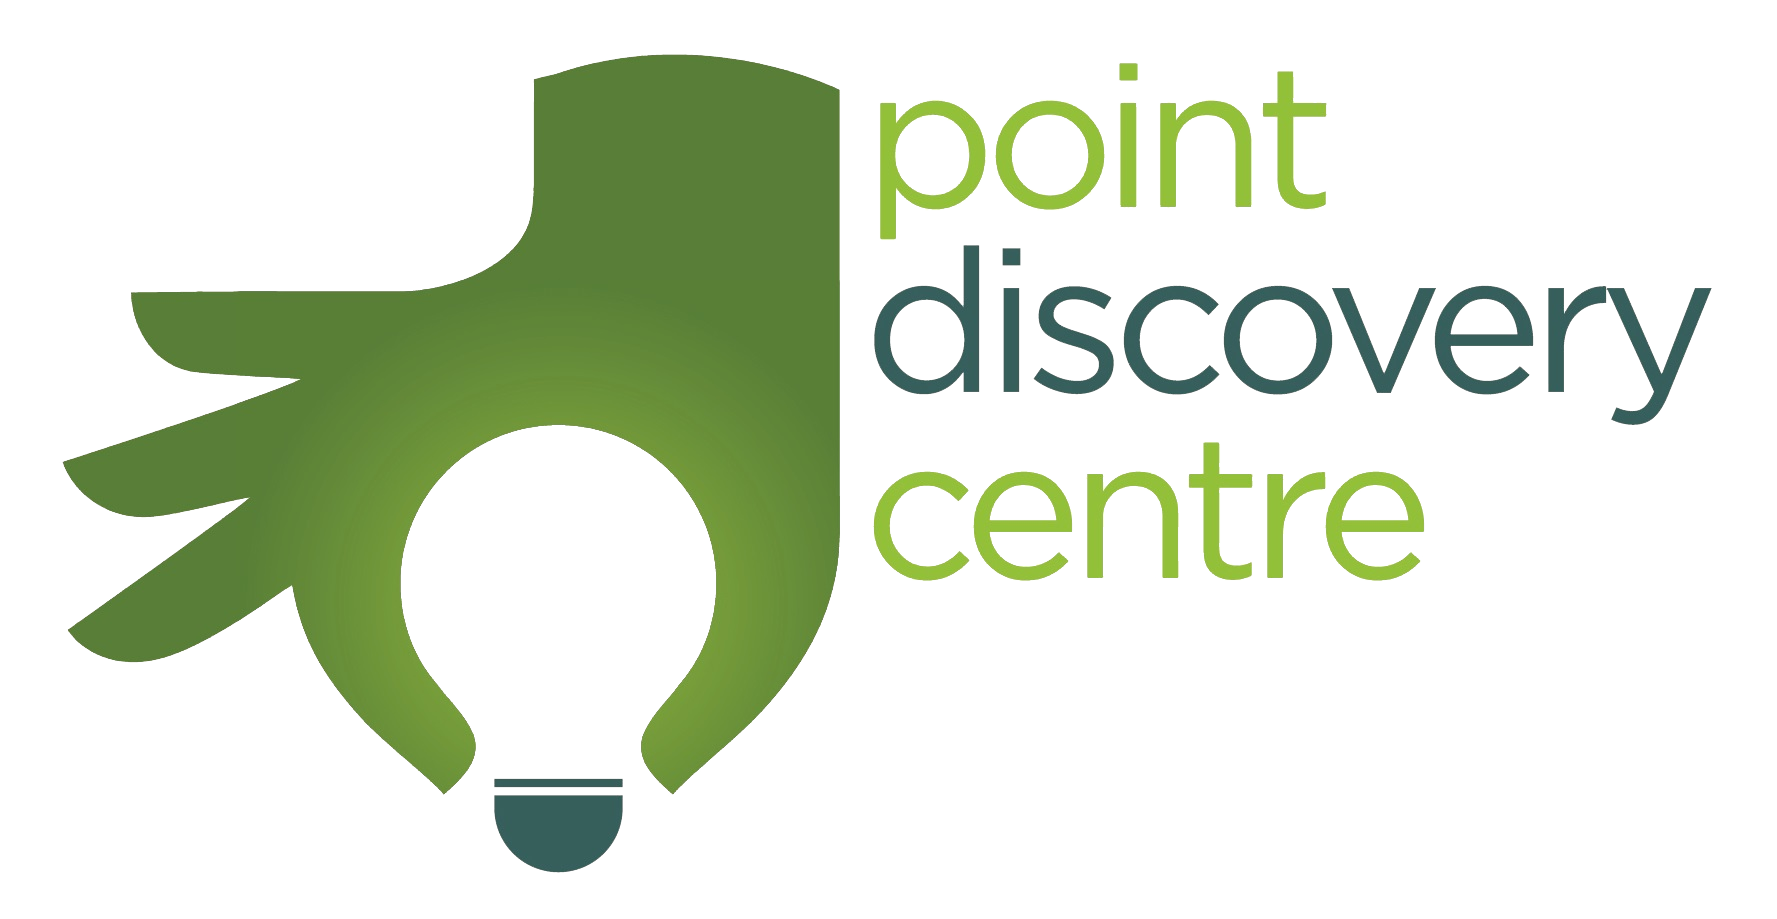 Point Discovery Centre